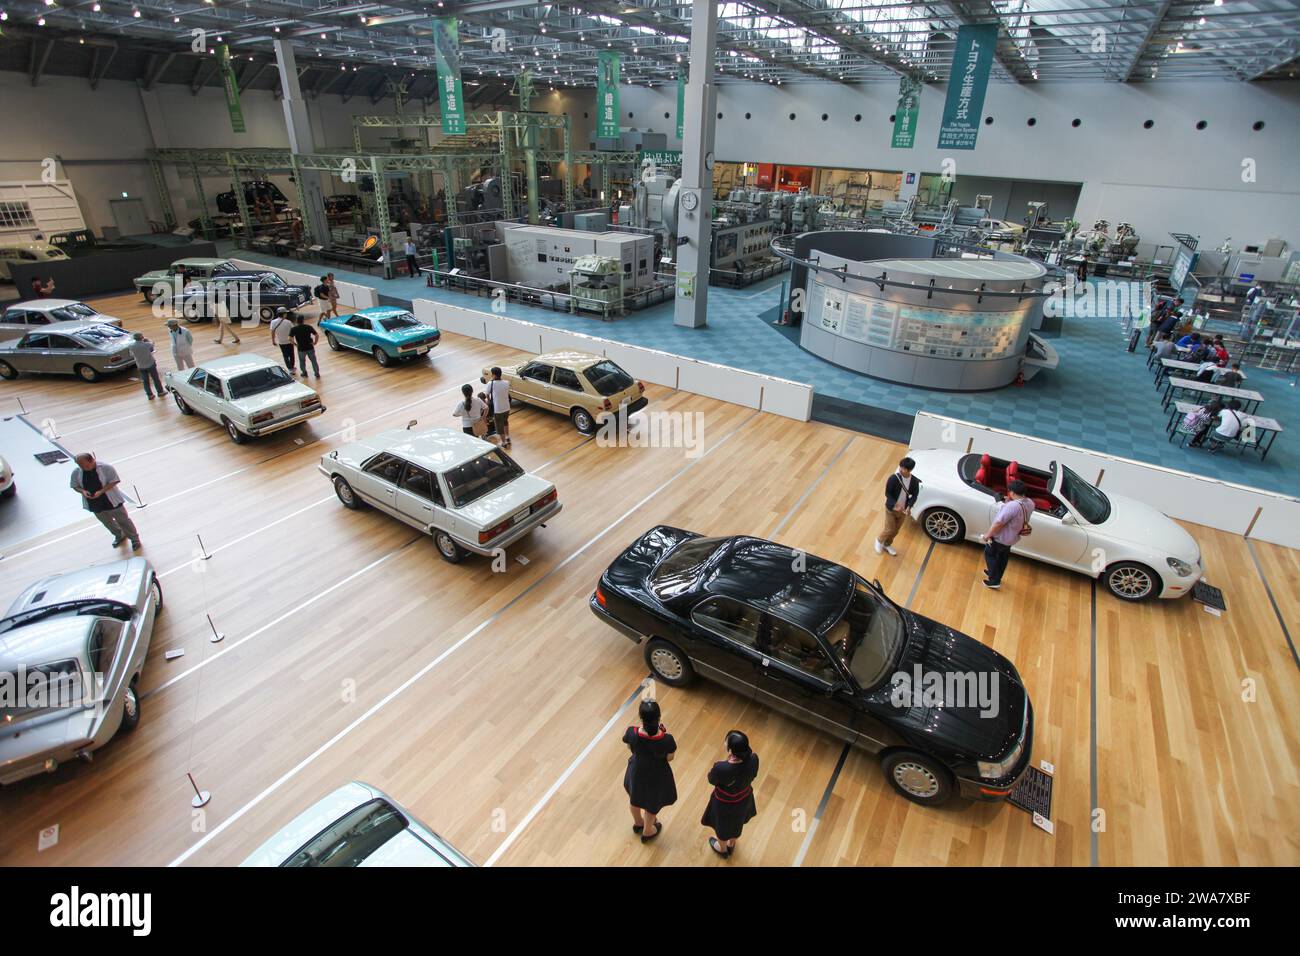 Inside the Toyota Commemorative Museum of Industry and Technology in Nagoya, Japan with a showroom of classic Toyota cars and historical machinery. Stock Photo